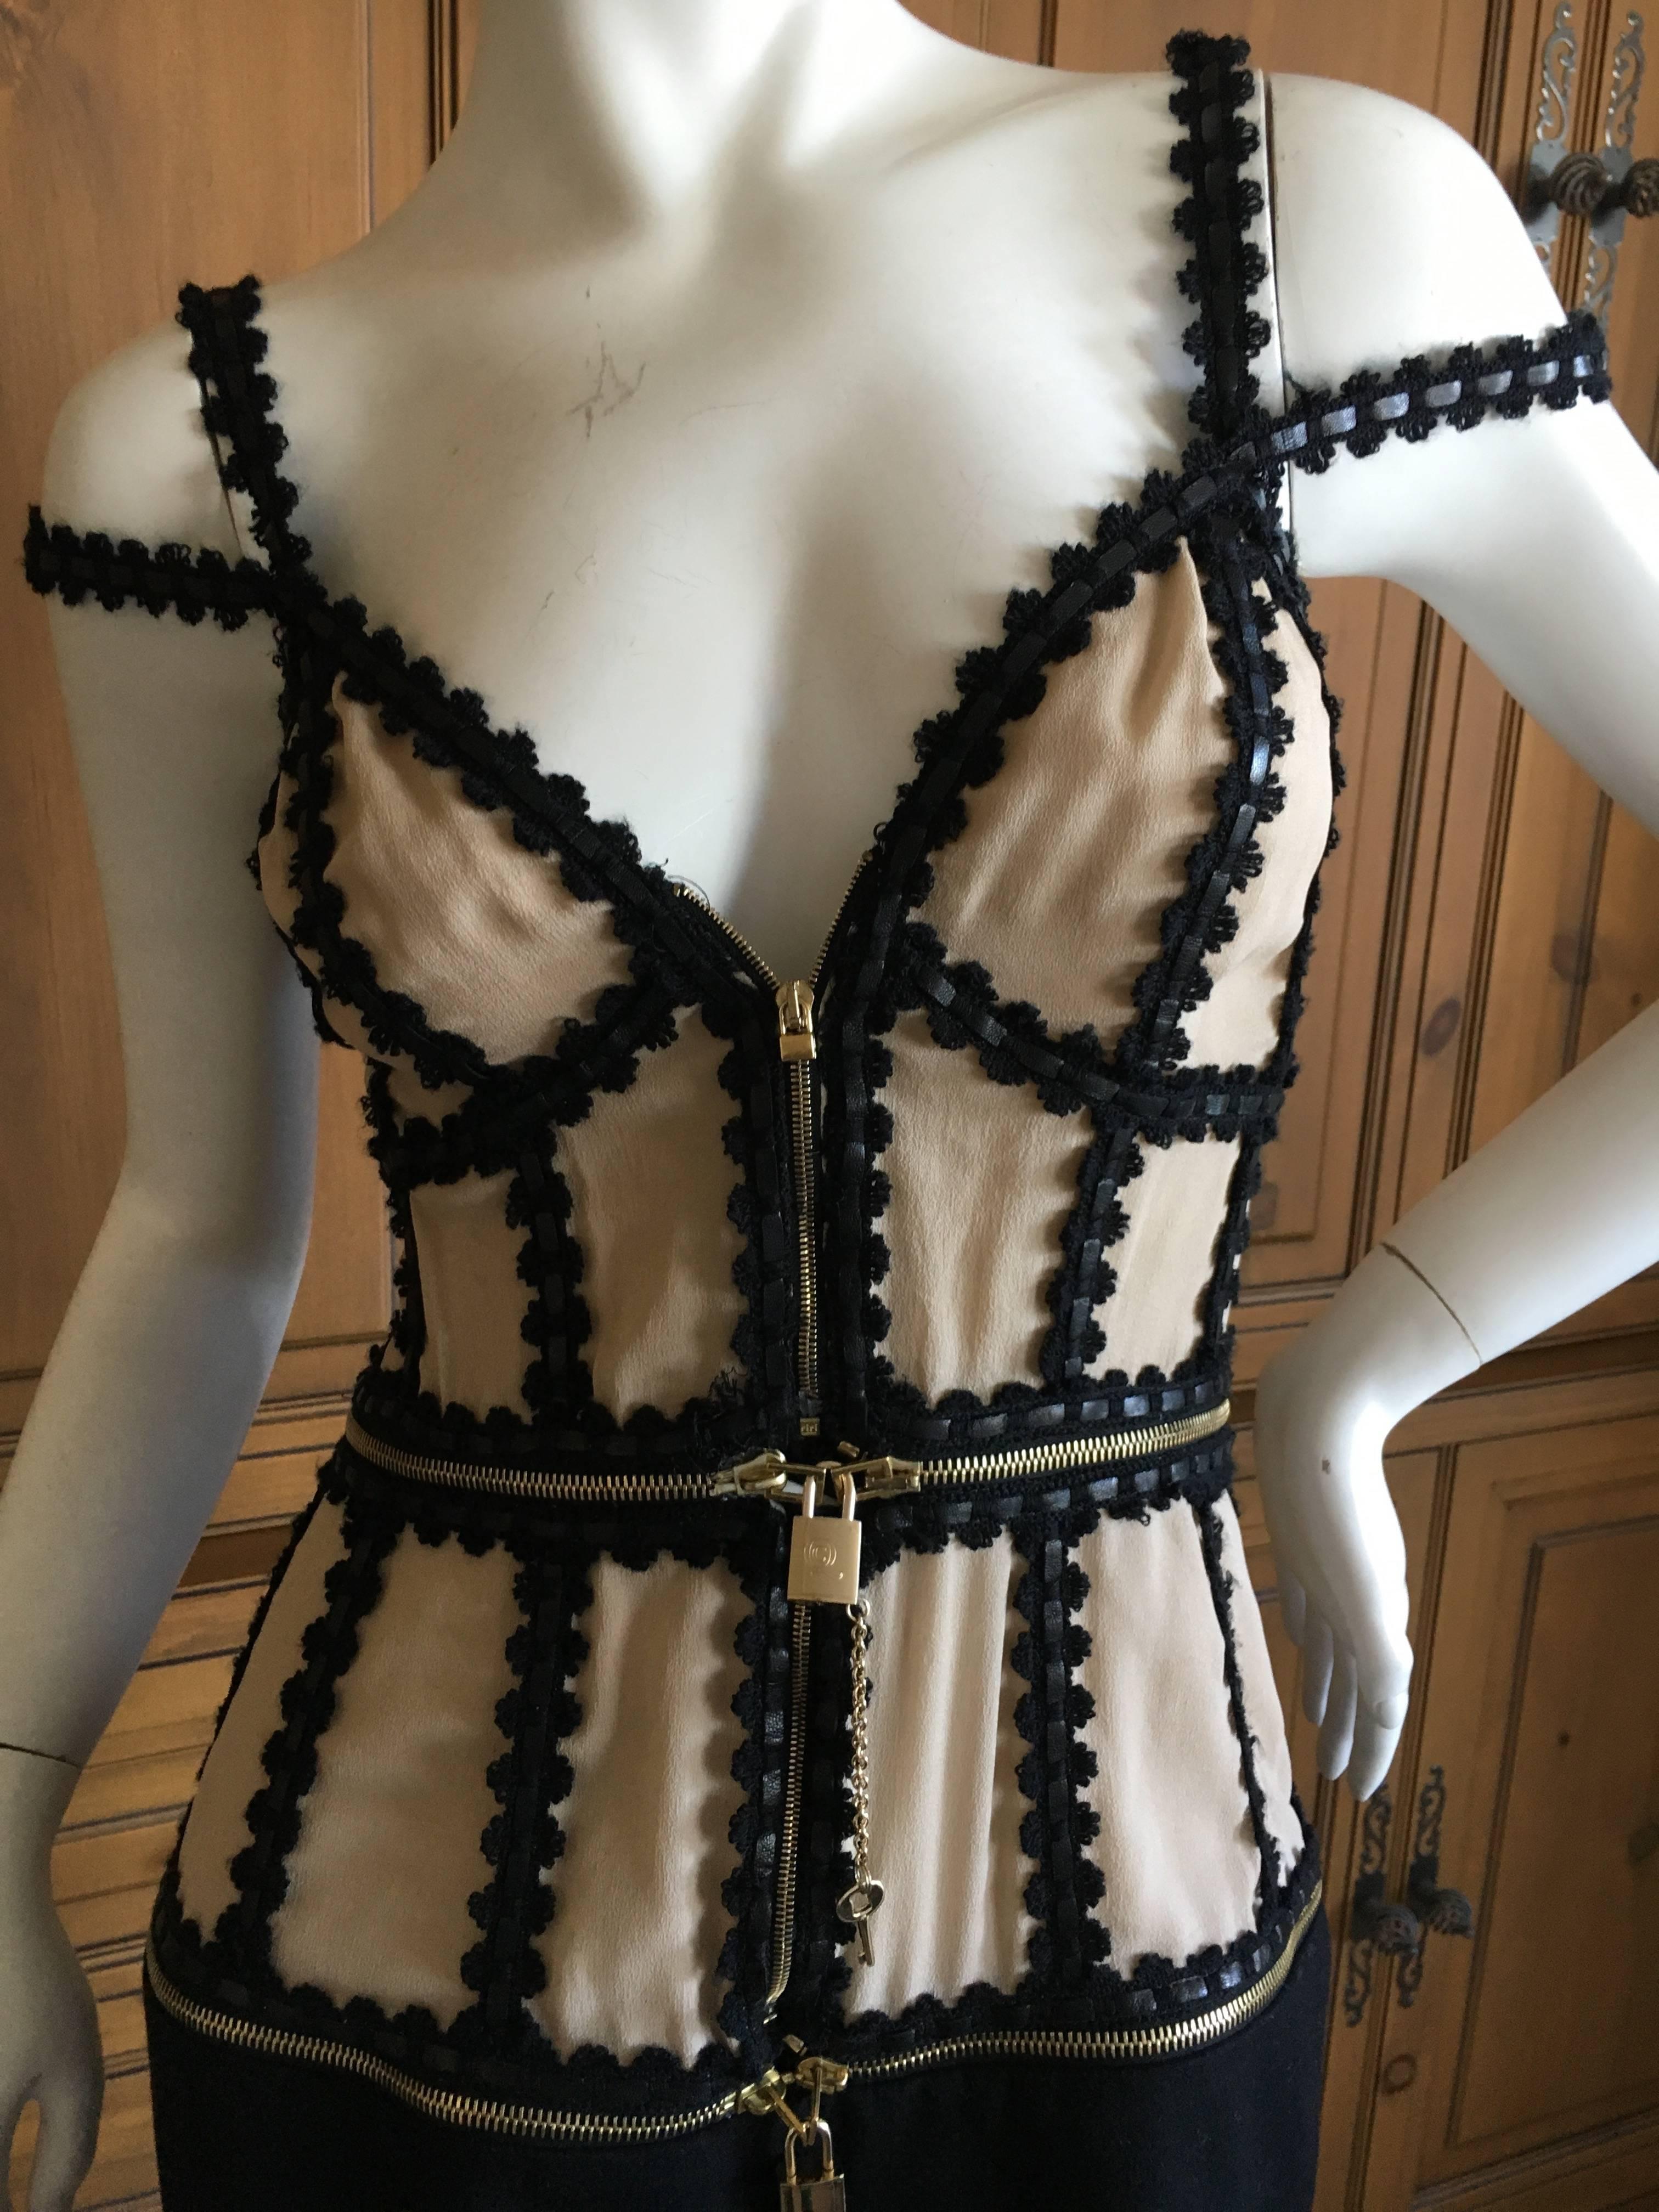 Alexander McQueen Zip Apart Transformer Dress with All Locks and Keys In Excellent Condition For Sale In Cloverdale, CA